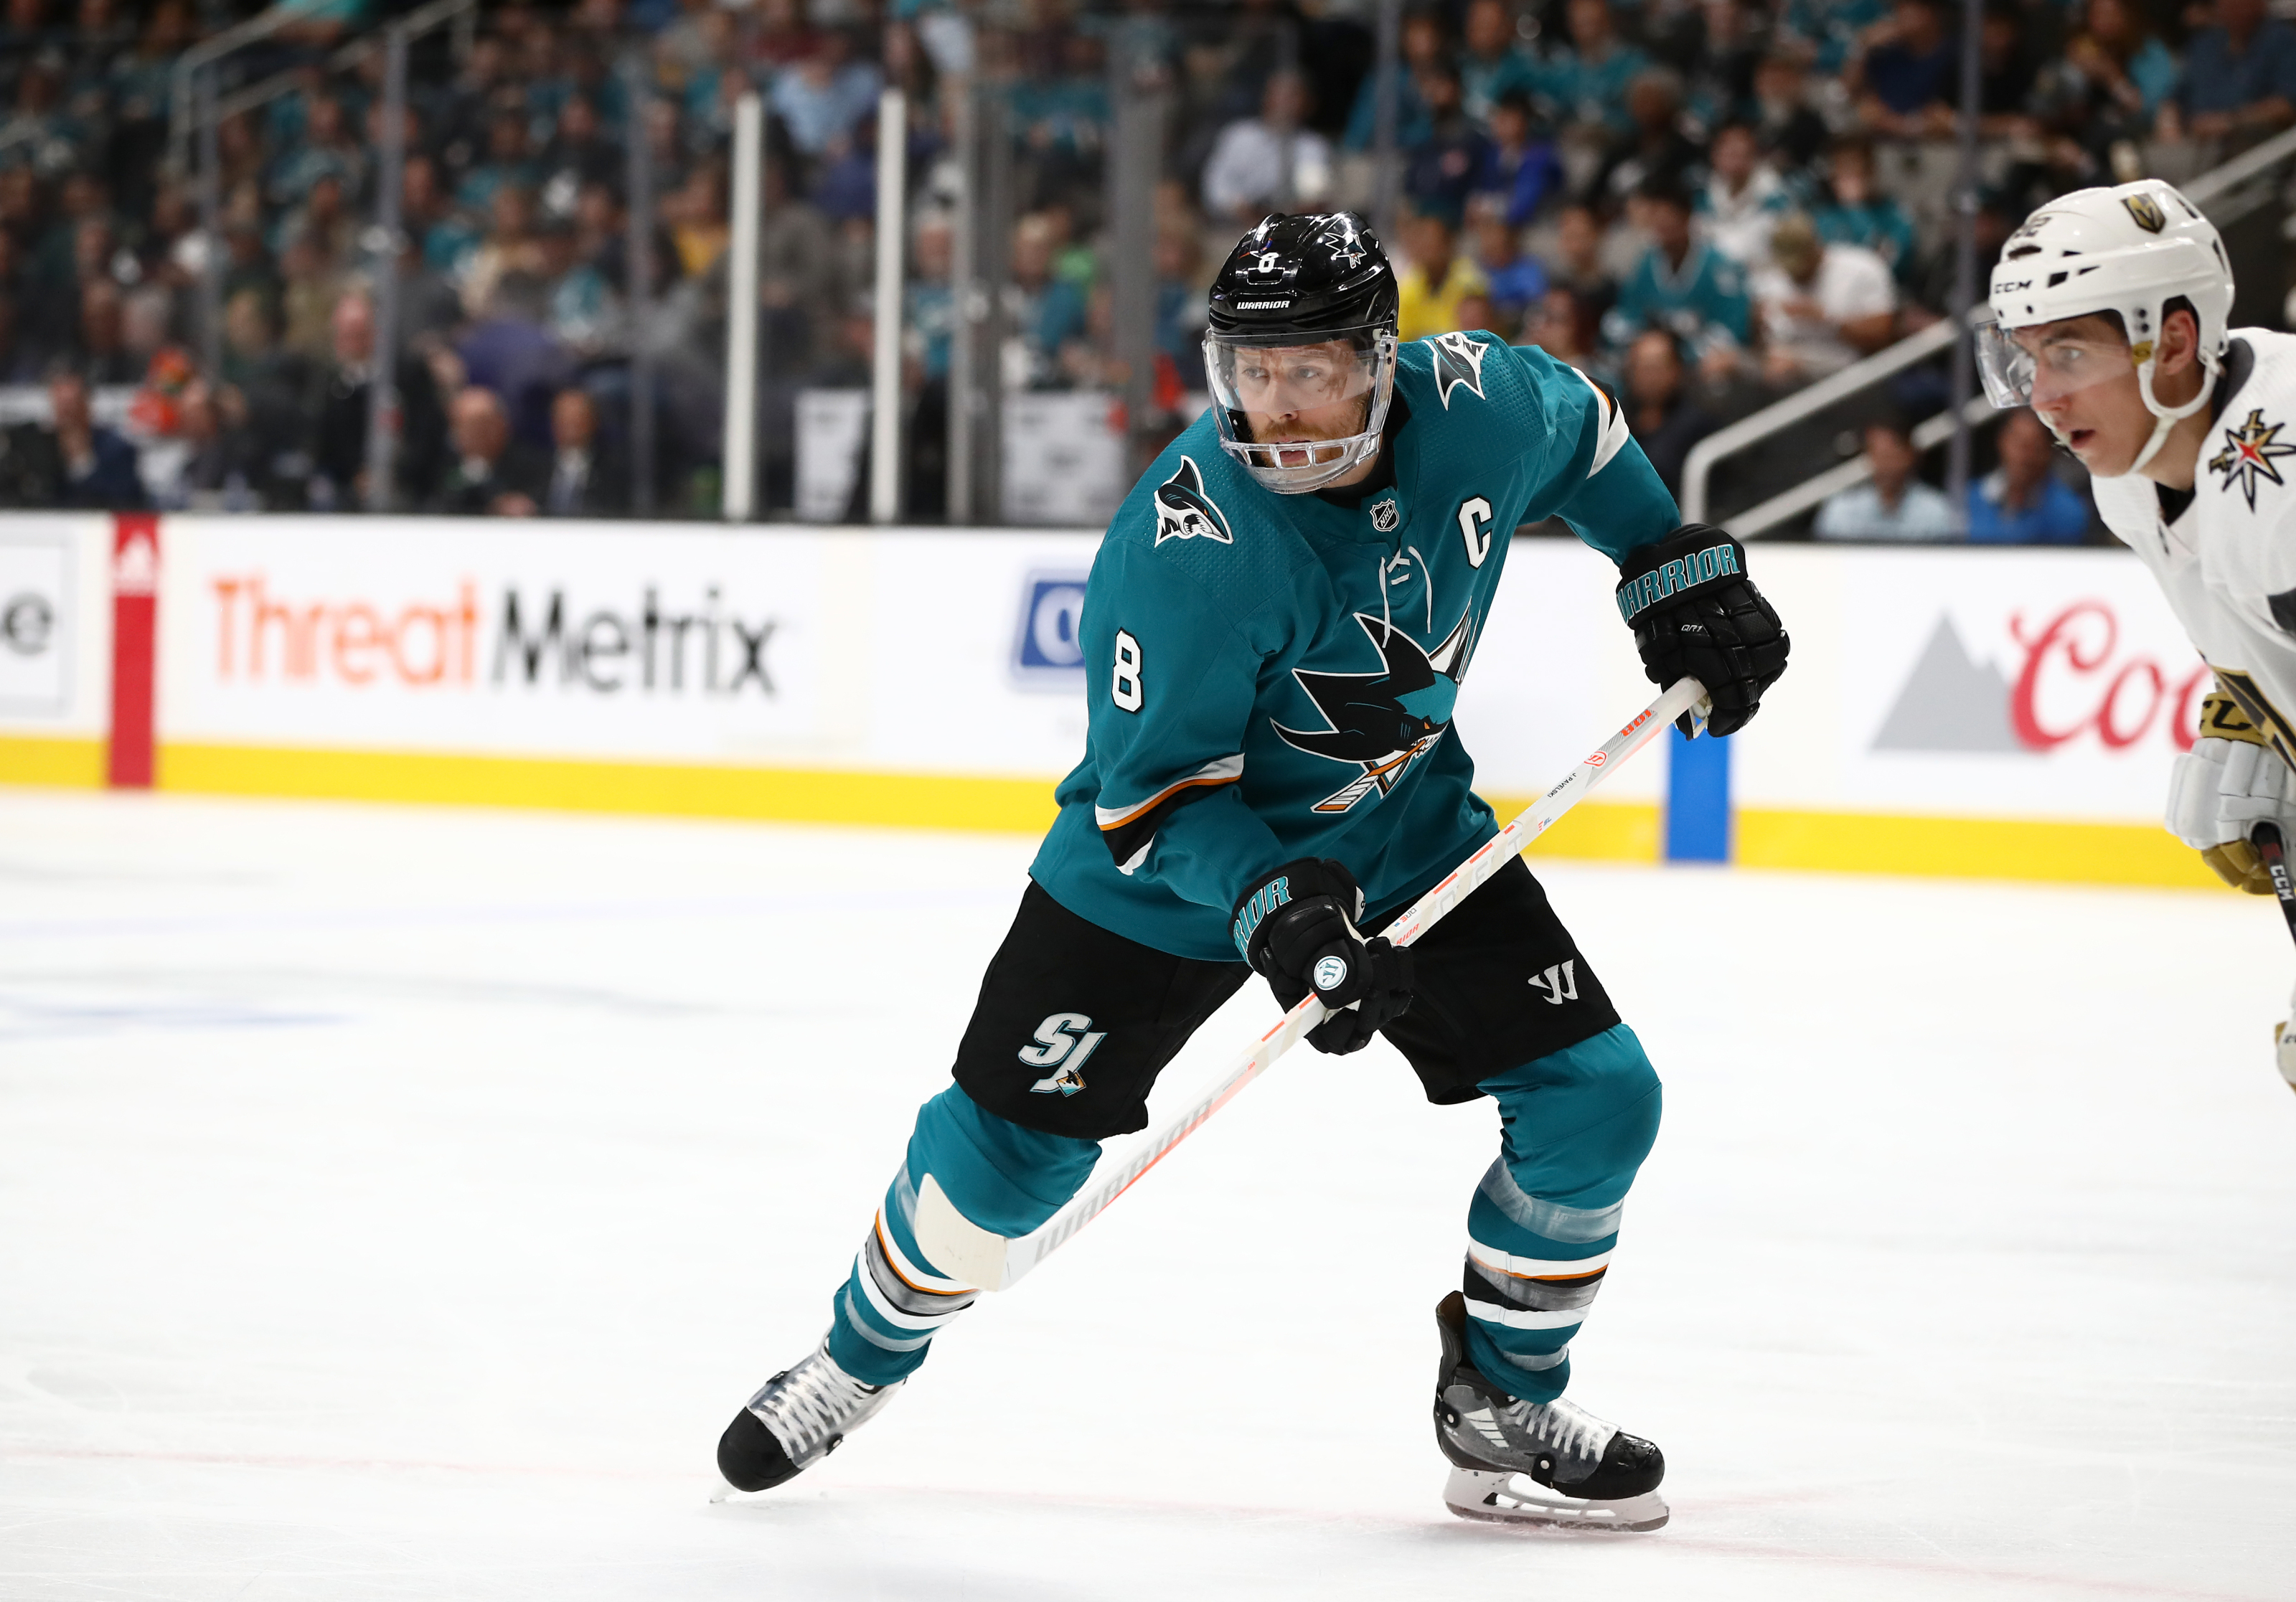 NHL Player Cards: San Jose Sharks - The Athletic